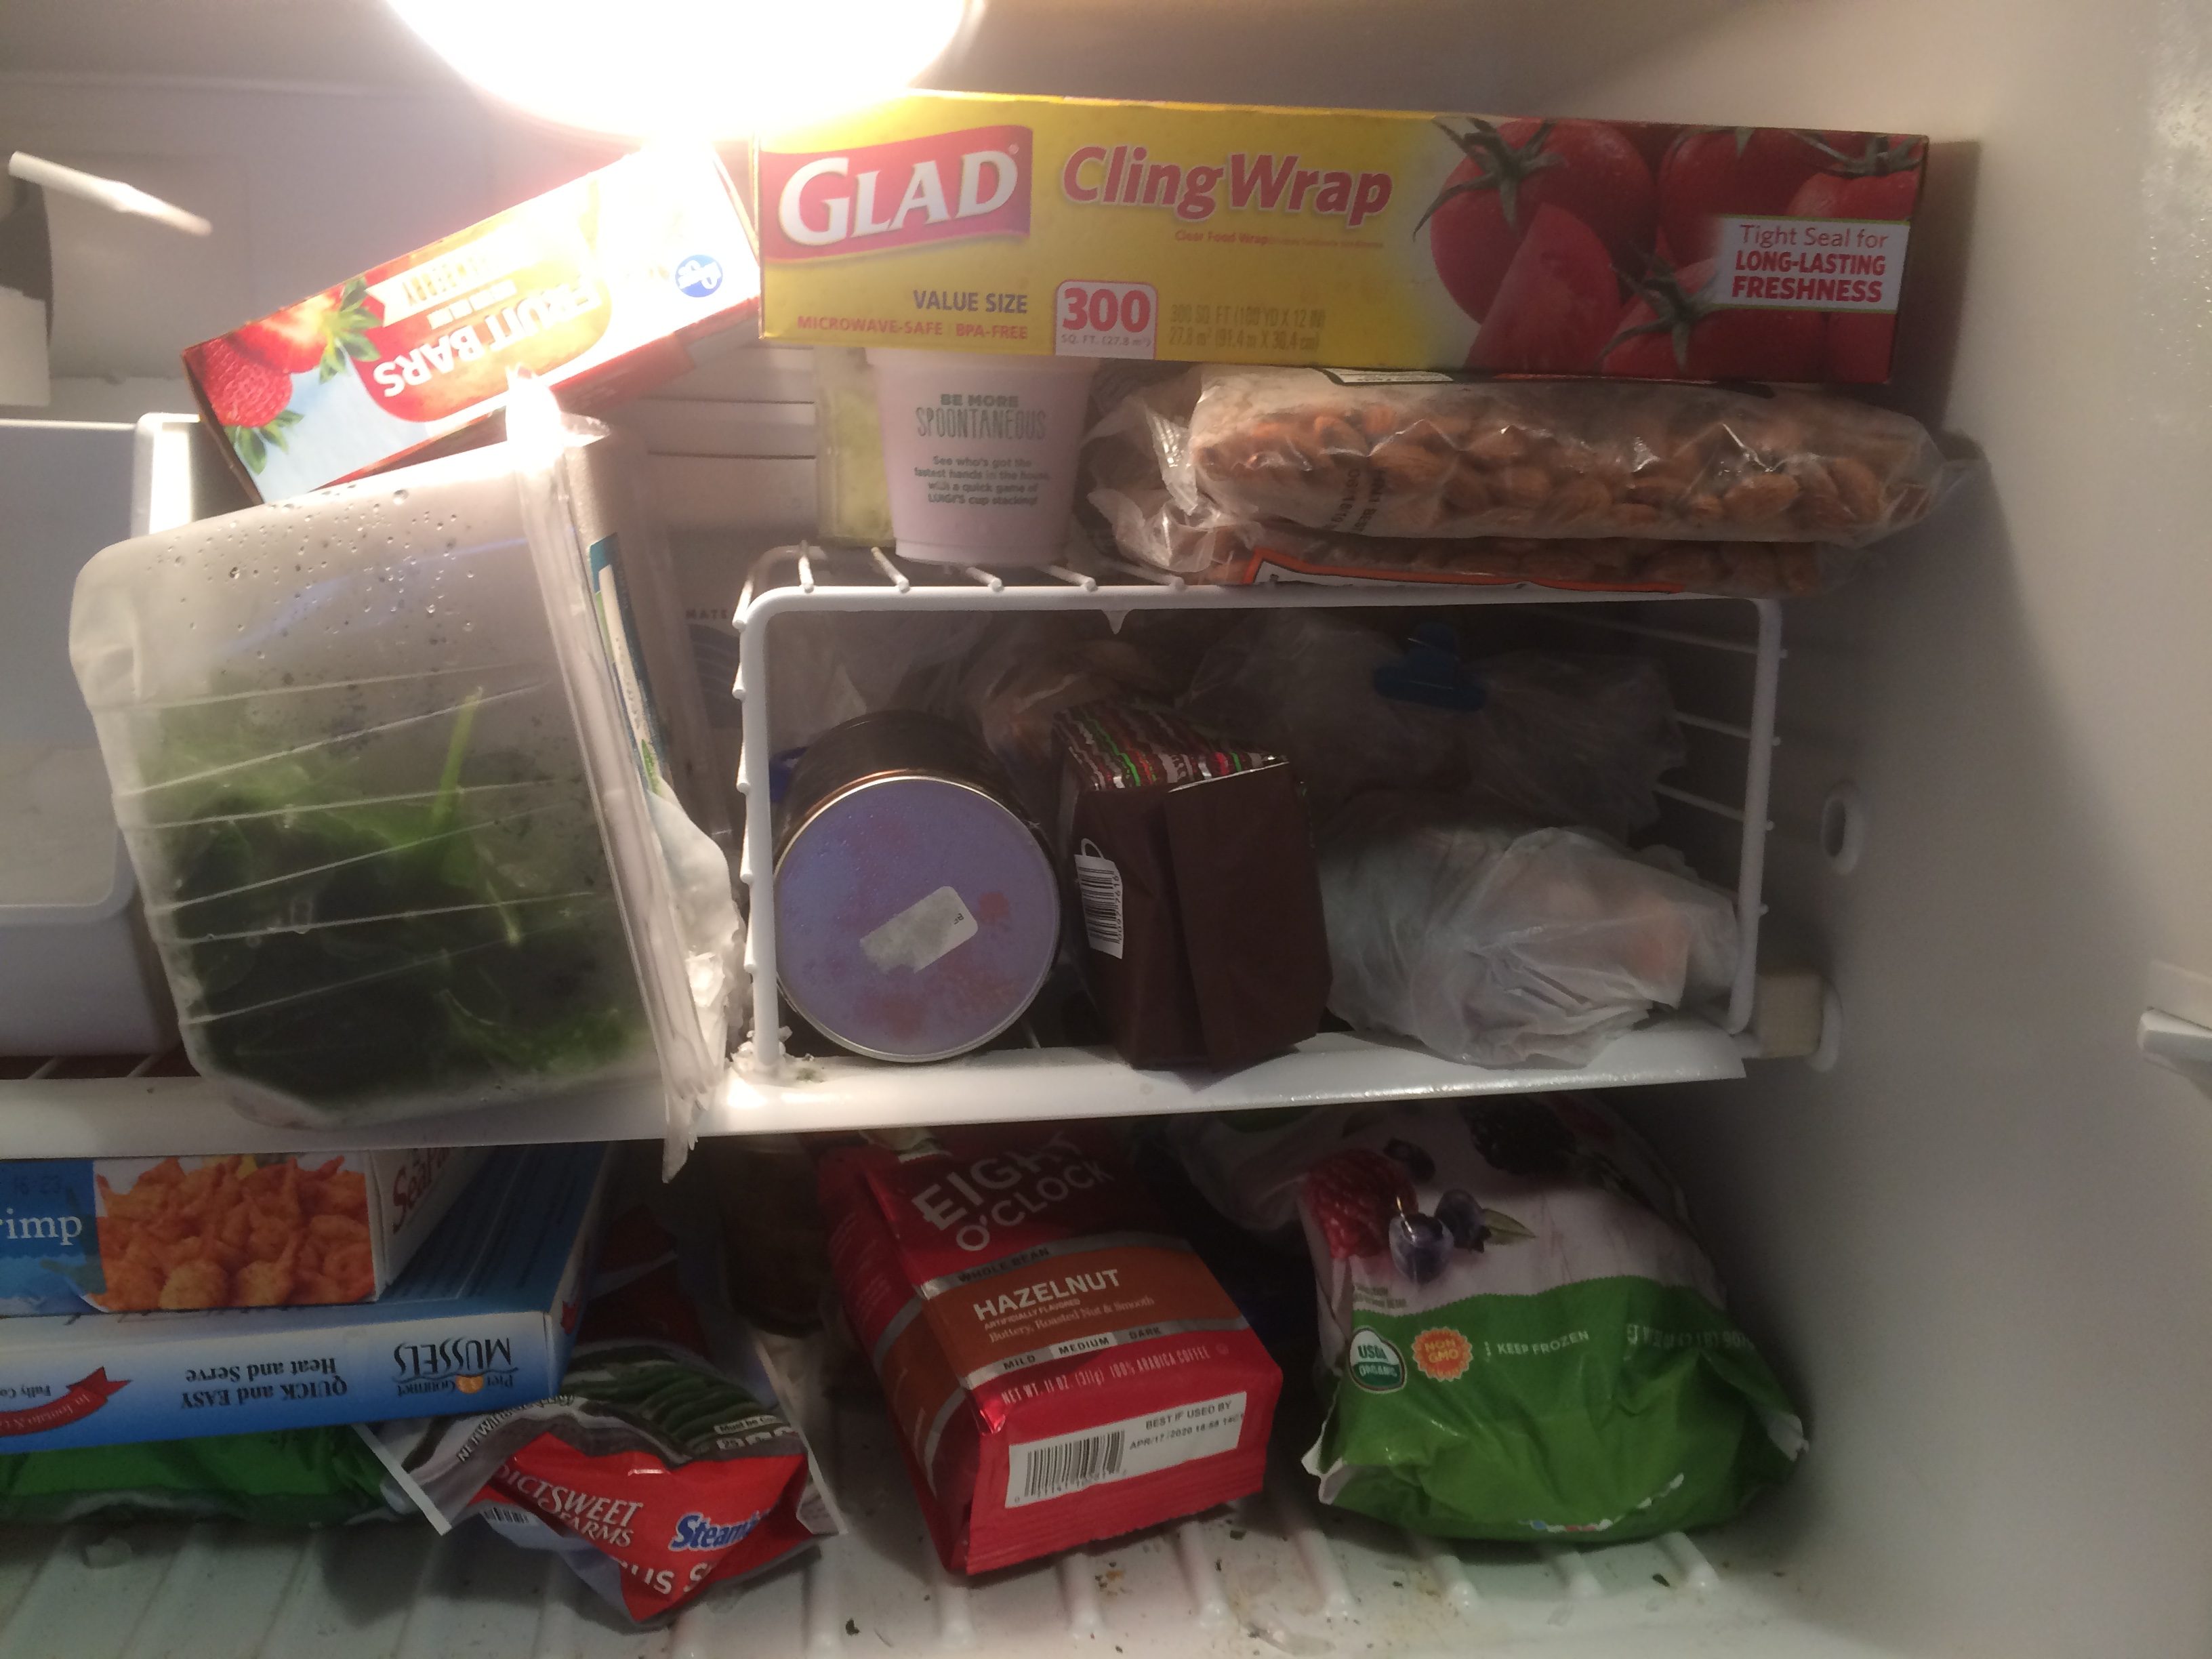 Plastic wrap storage hack, why you should store it in the freezer